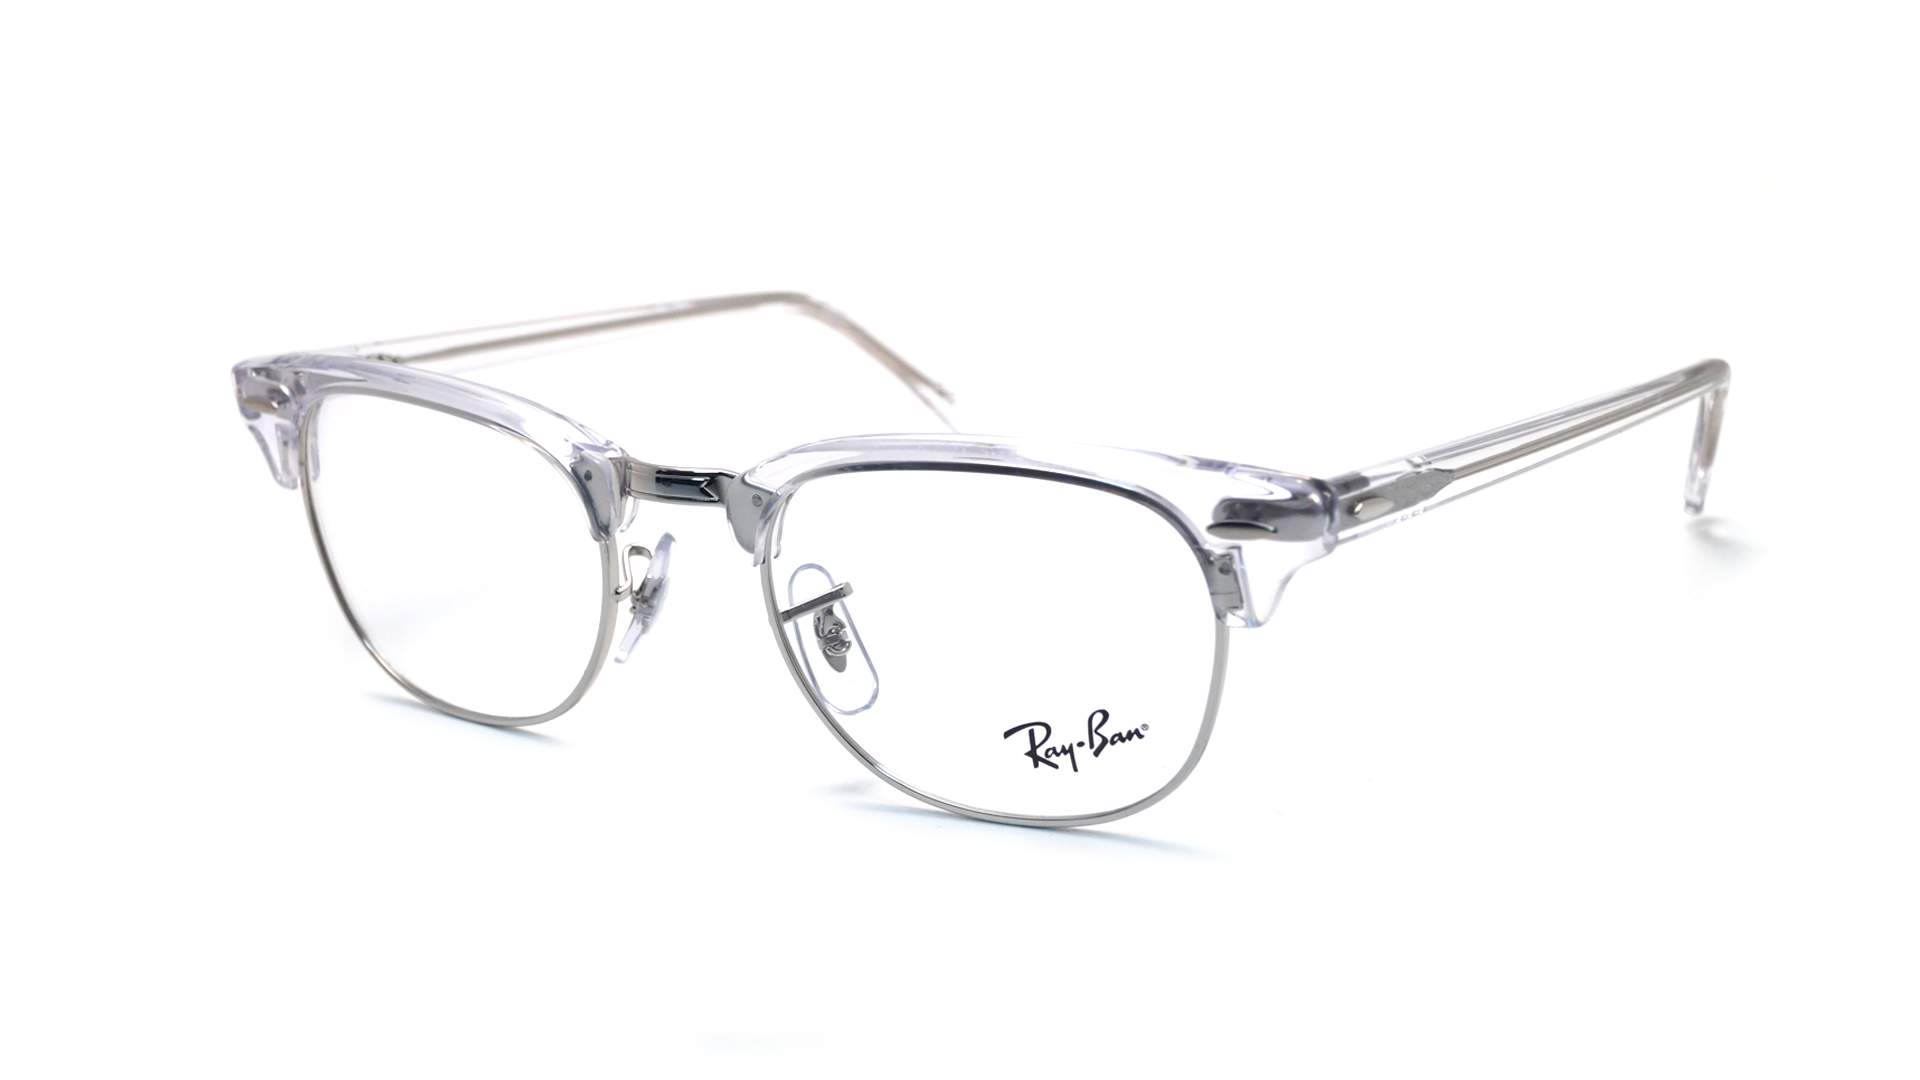 Ray Ban Clubmaster Optics Clear Rx5154 01 51 21 Visiofactory